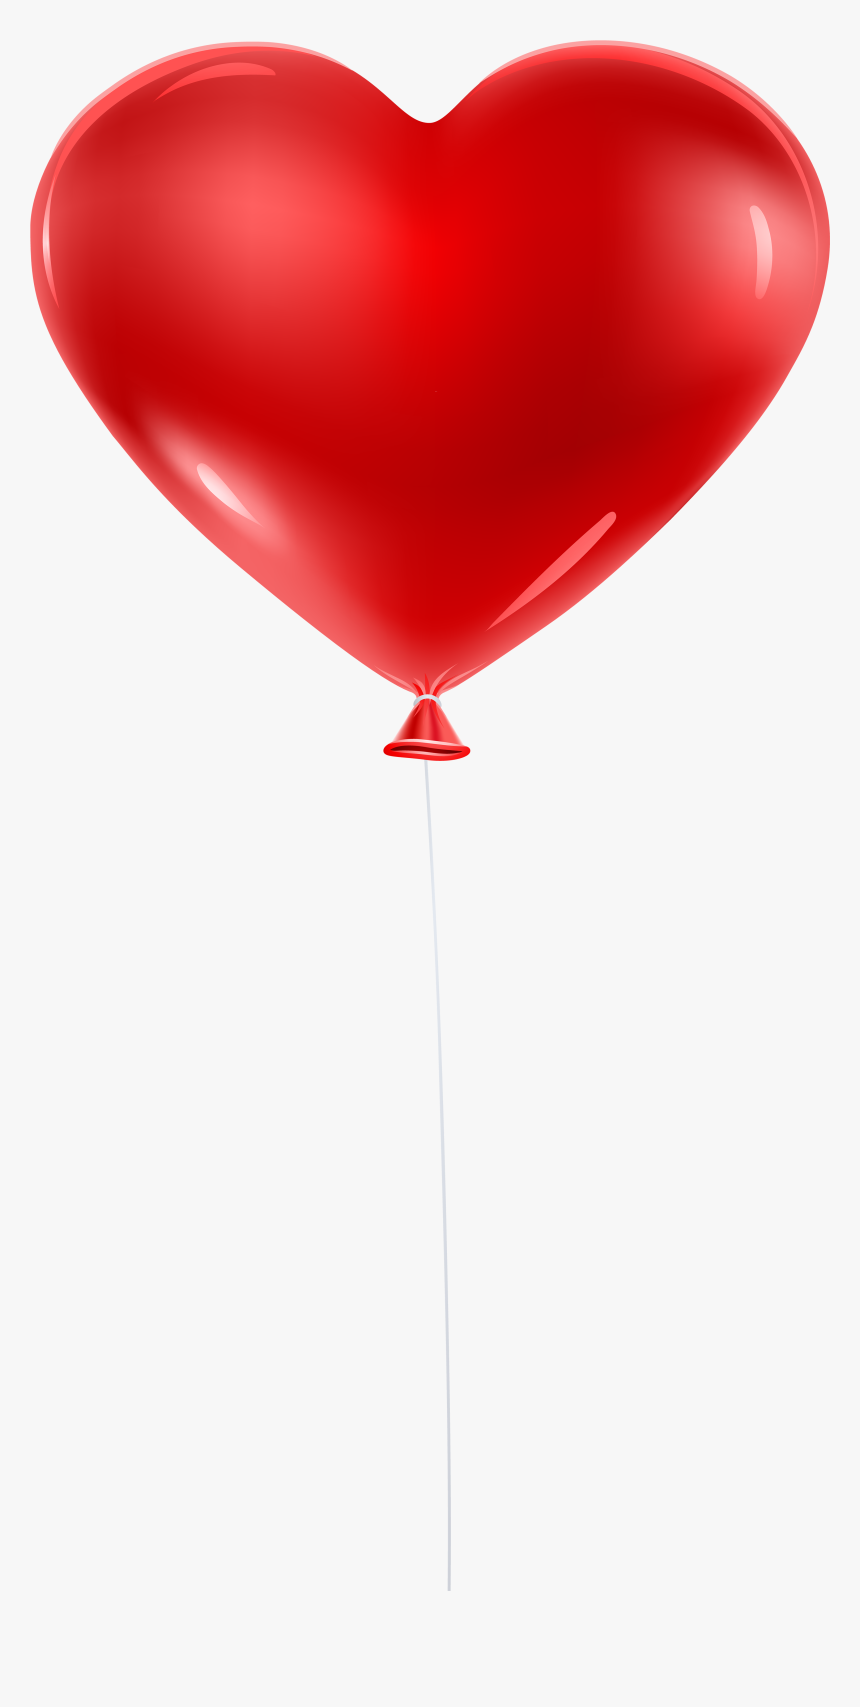 Red Balloon Heart Transparent Clip Artu200b Gallery - Balloon, HD Png Download, Free Download